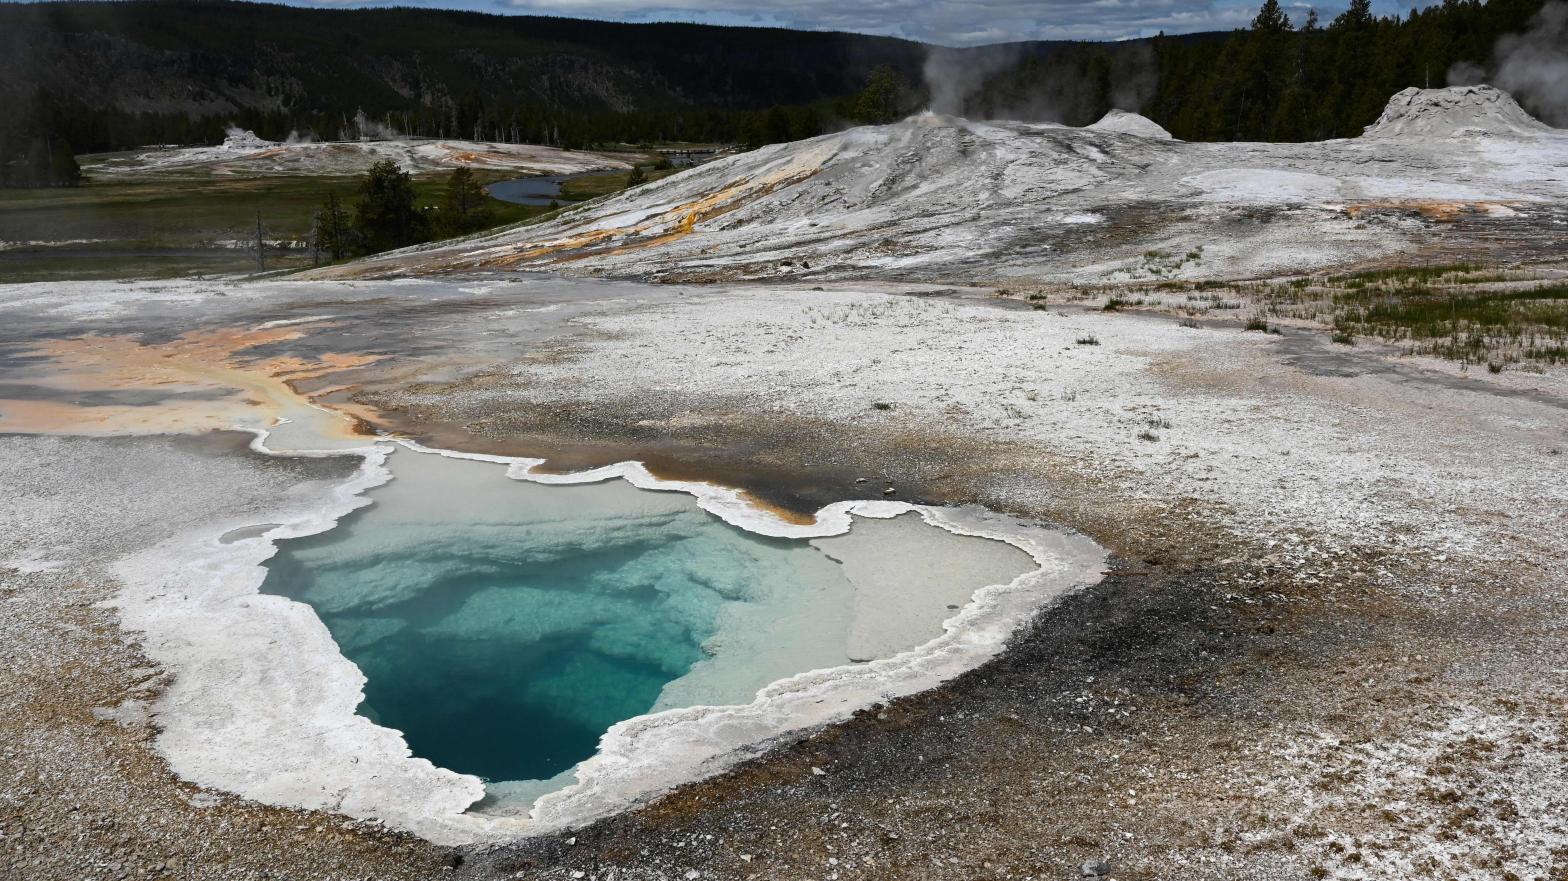 Heart Spring in Yellowstone National Park. (Photo: Daniel SLIM / AFP, Getty Images)